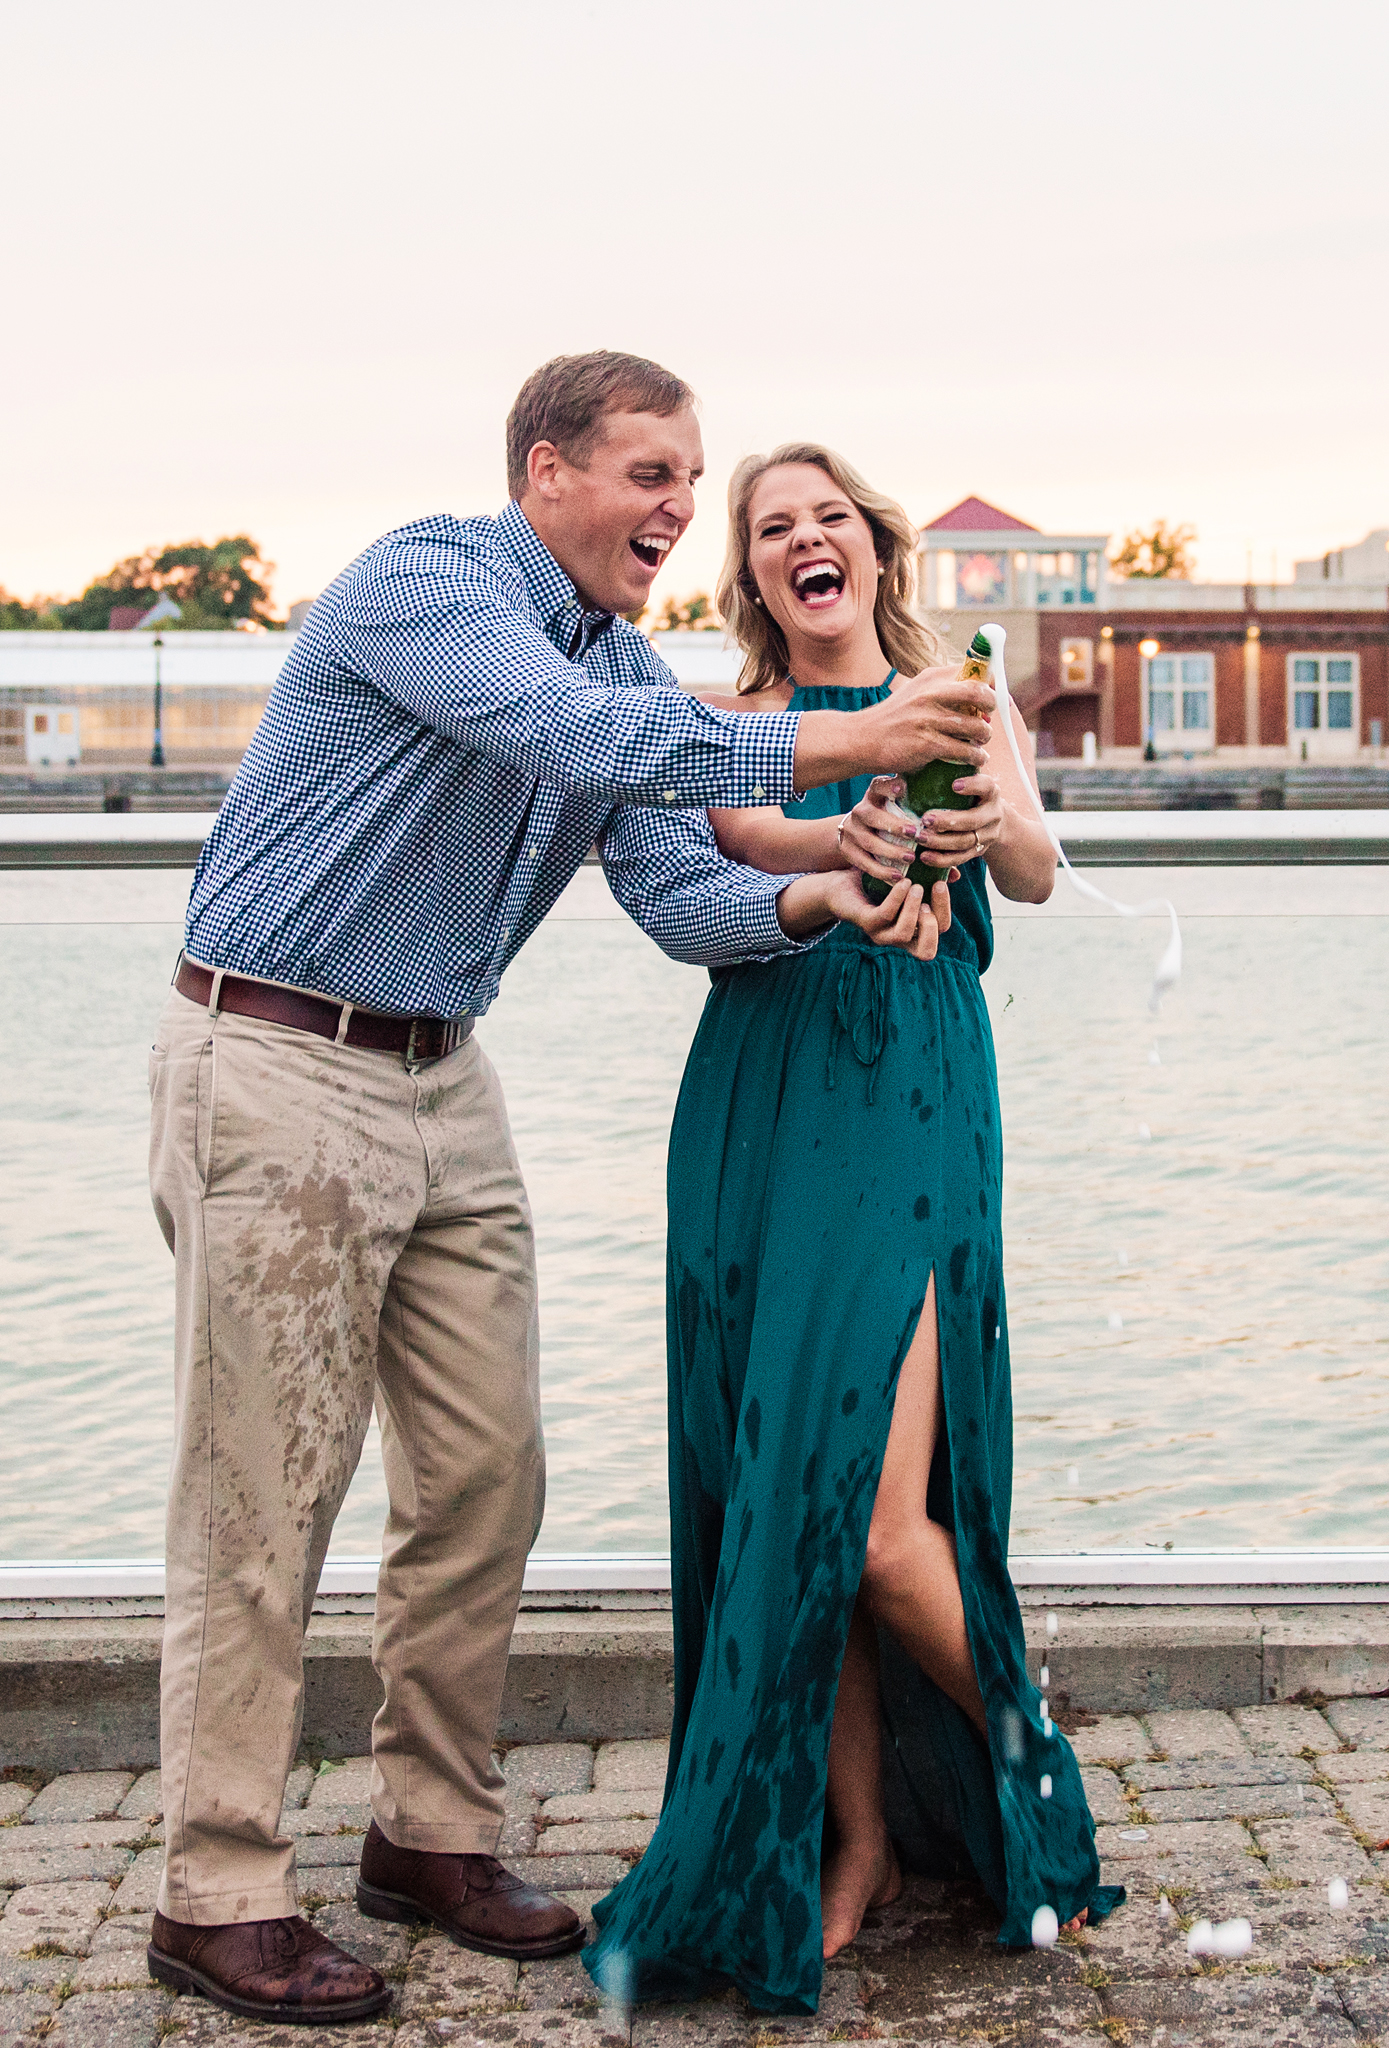 George_Eastman_House_Rochester_Yacht_Club_Rochester_Engagement_Session_JILL_STUDIO_Rochester_NY_Photographer_DSC_8295.jpg